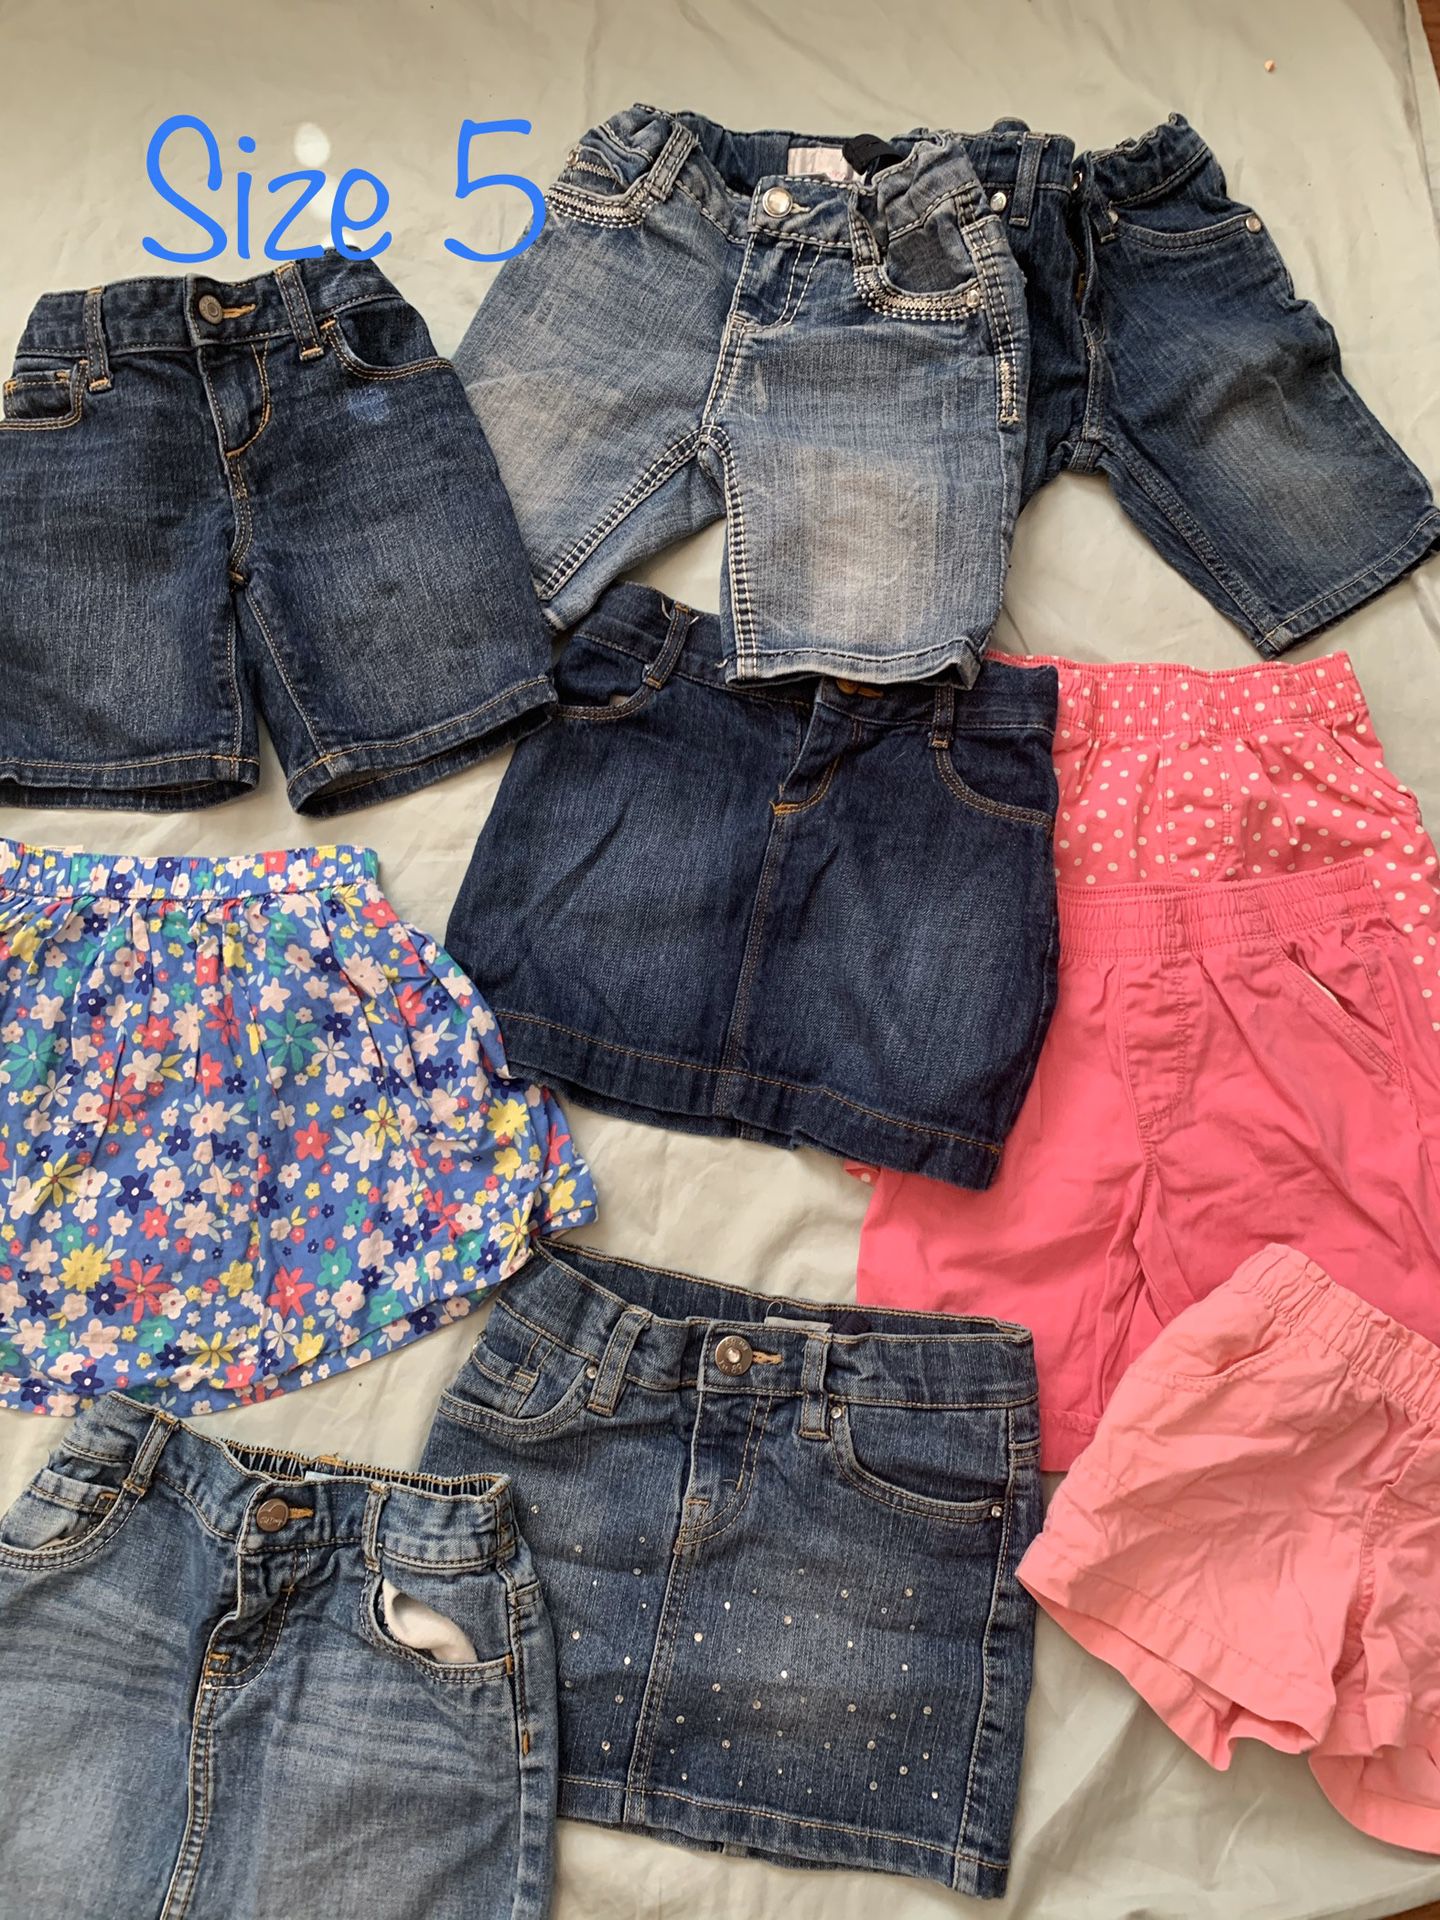 Size 5 All clothes are like new only worn Once or twice 3 skirts 6 shorts 2 jeans 4 shirts 1 fur vest 1 leggings with tutu Located at Ellsworth loop